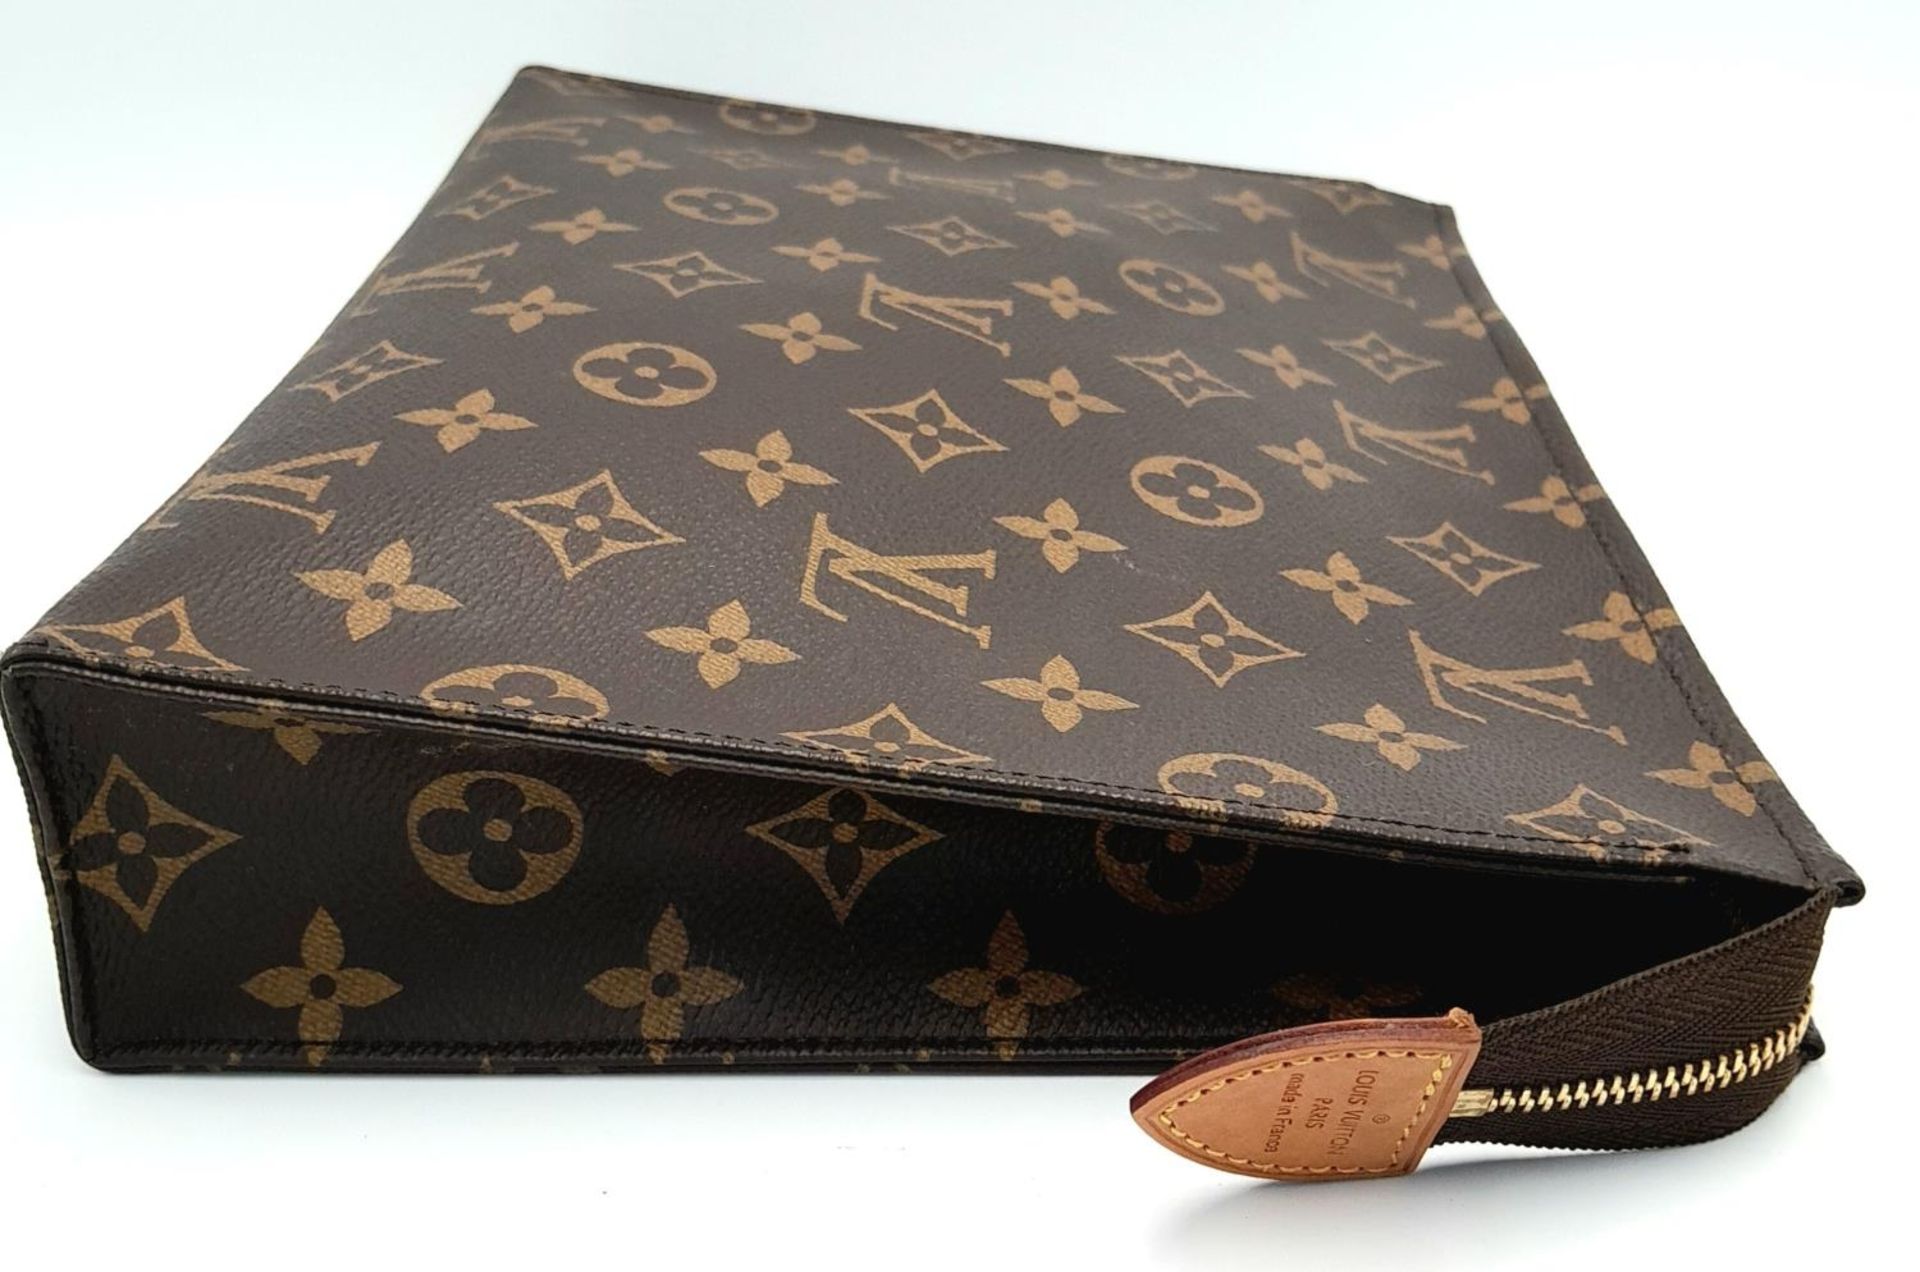 A Louis Vuitton Toiletries Pouch. Monogramed canvas exterior with gold-toned hardware and zipped top - Image 3 of 9